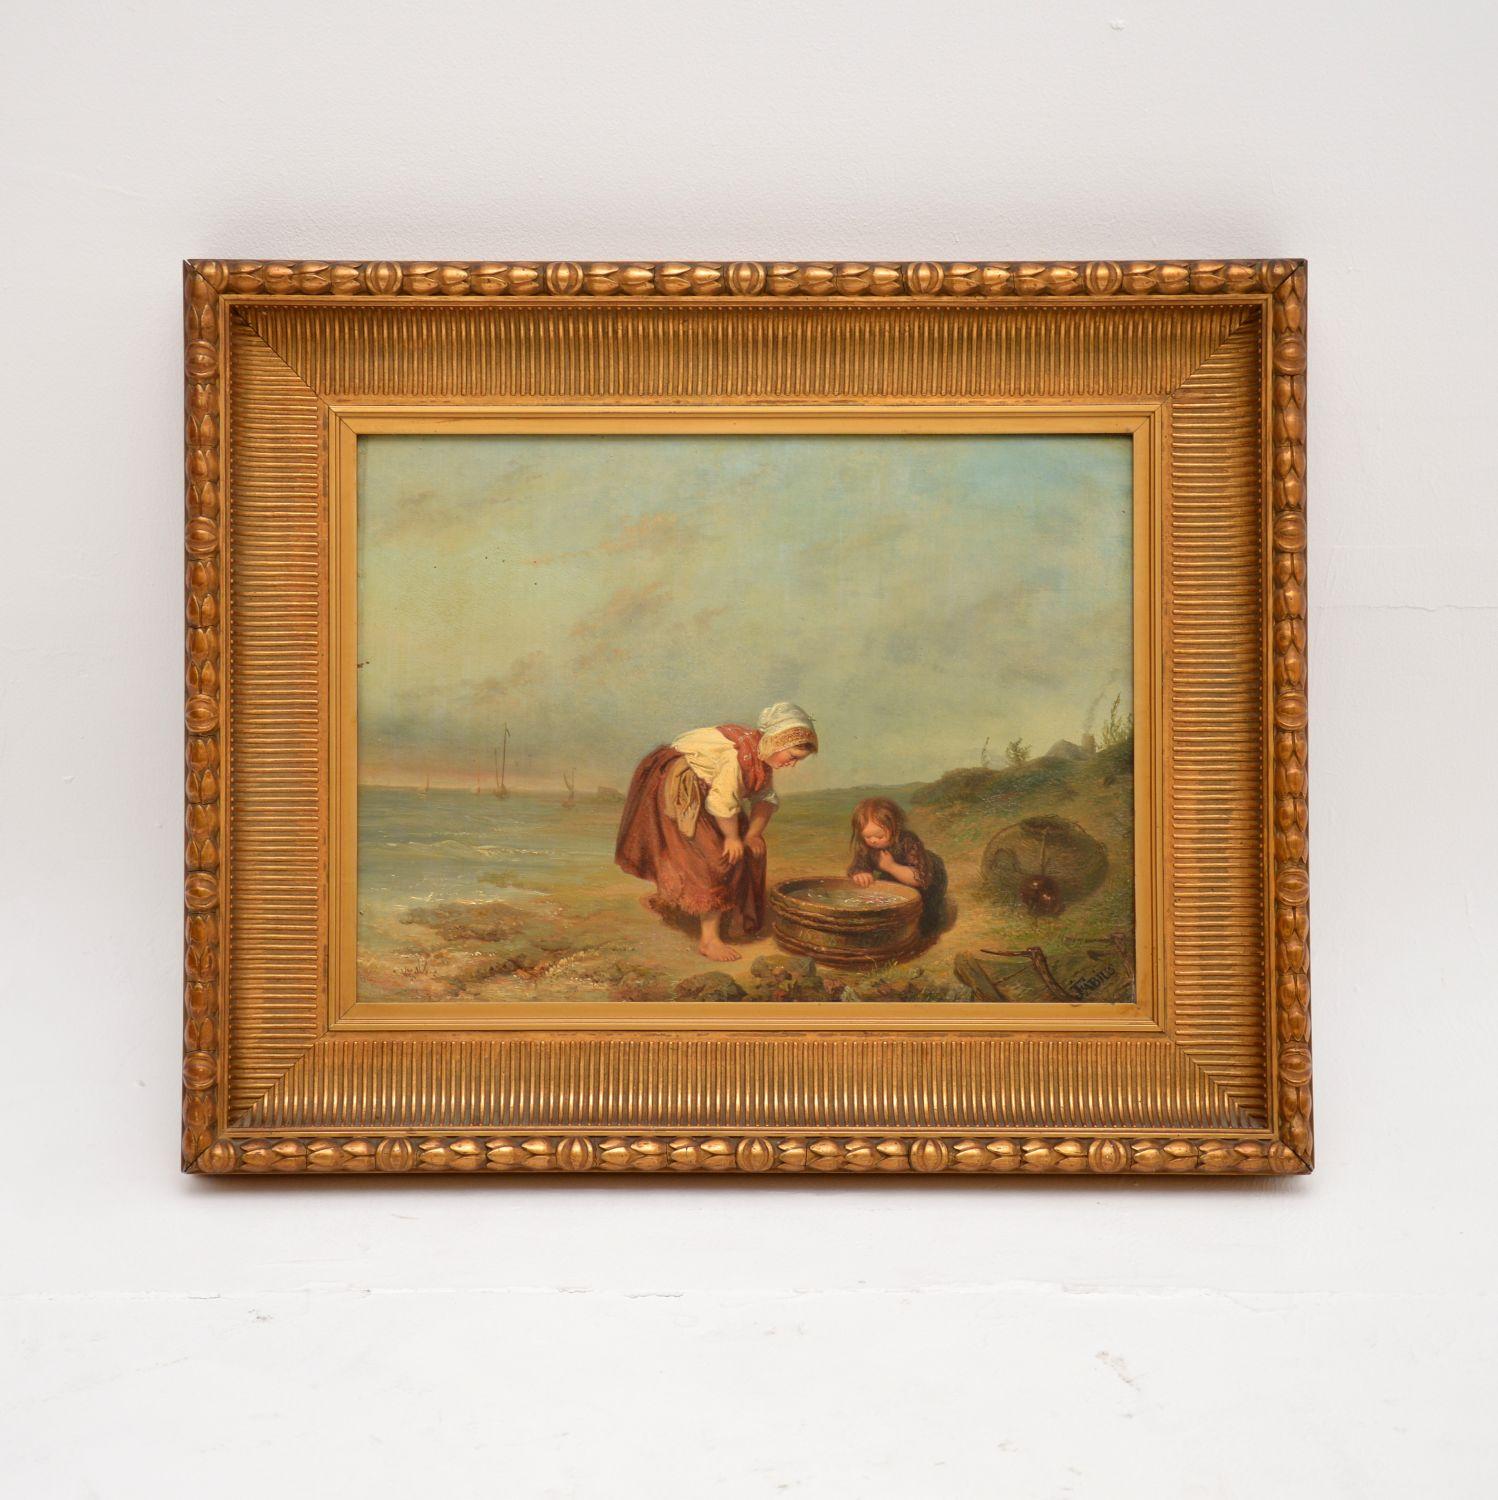 An absolutely gorgeous antique oil painting by Jan Fabius, who was a well known Dutch artist (1820-1889). This is signed by the artist, and is also dated on the water barrel in the image, 16/6/1870.

This is beautifully executed and depicts a lovely